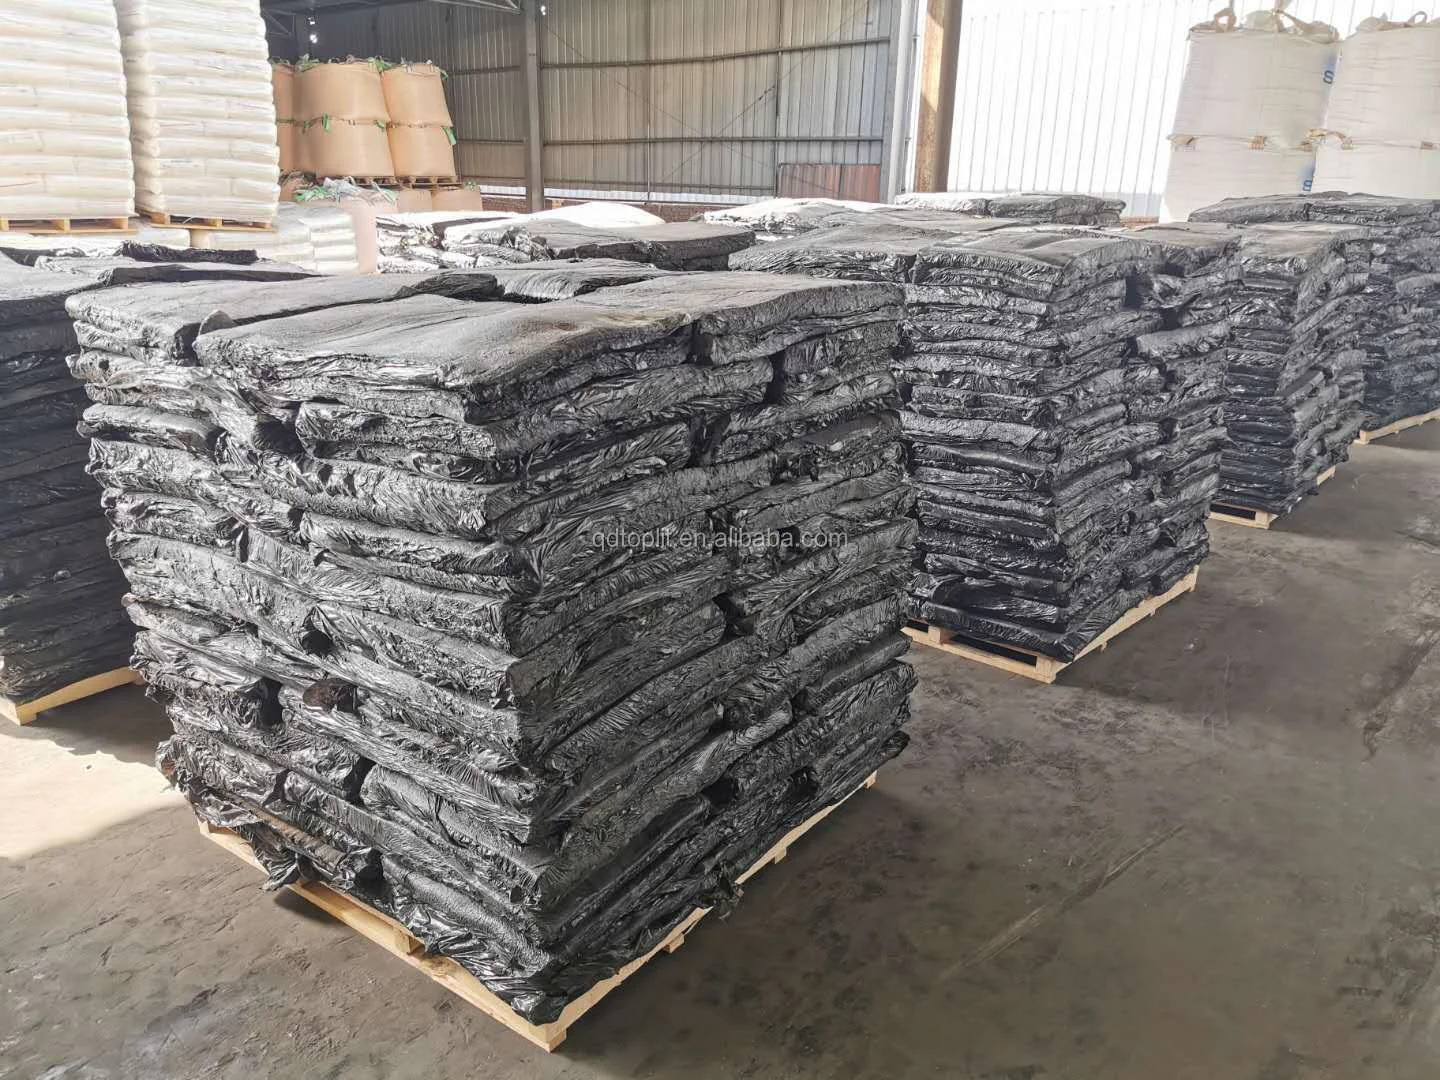 Black reclaimed rubber / recycled rubber from tires scrap